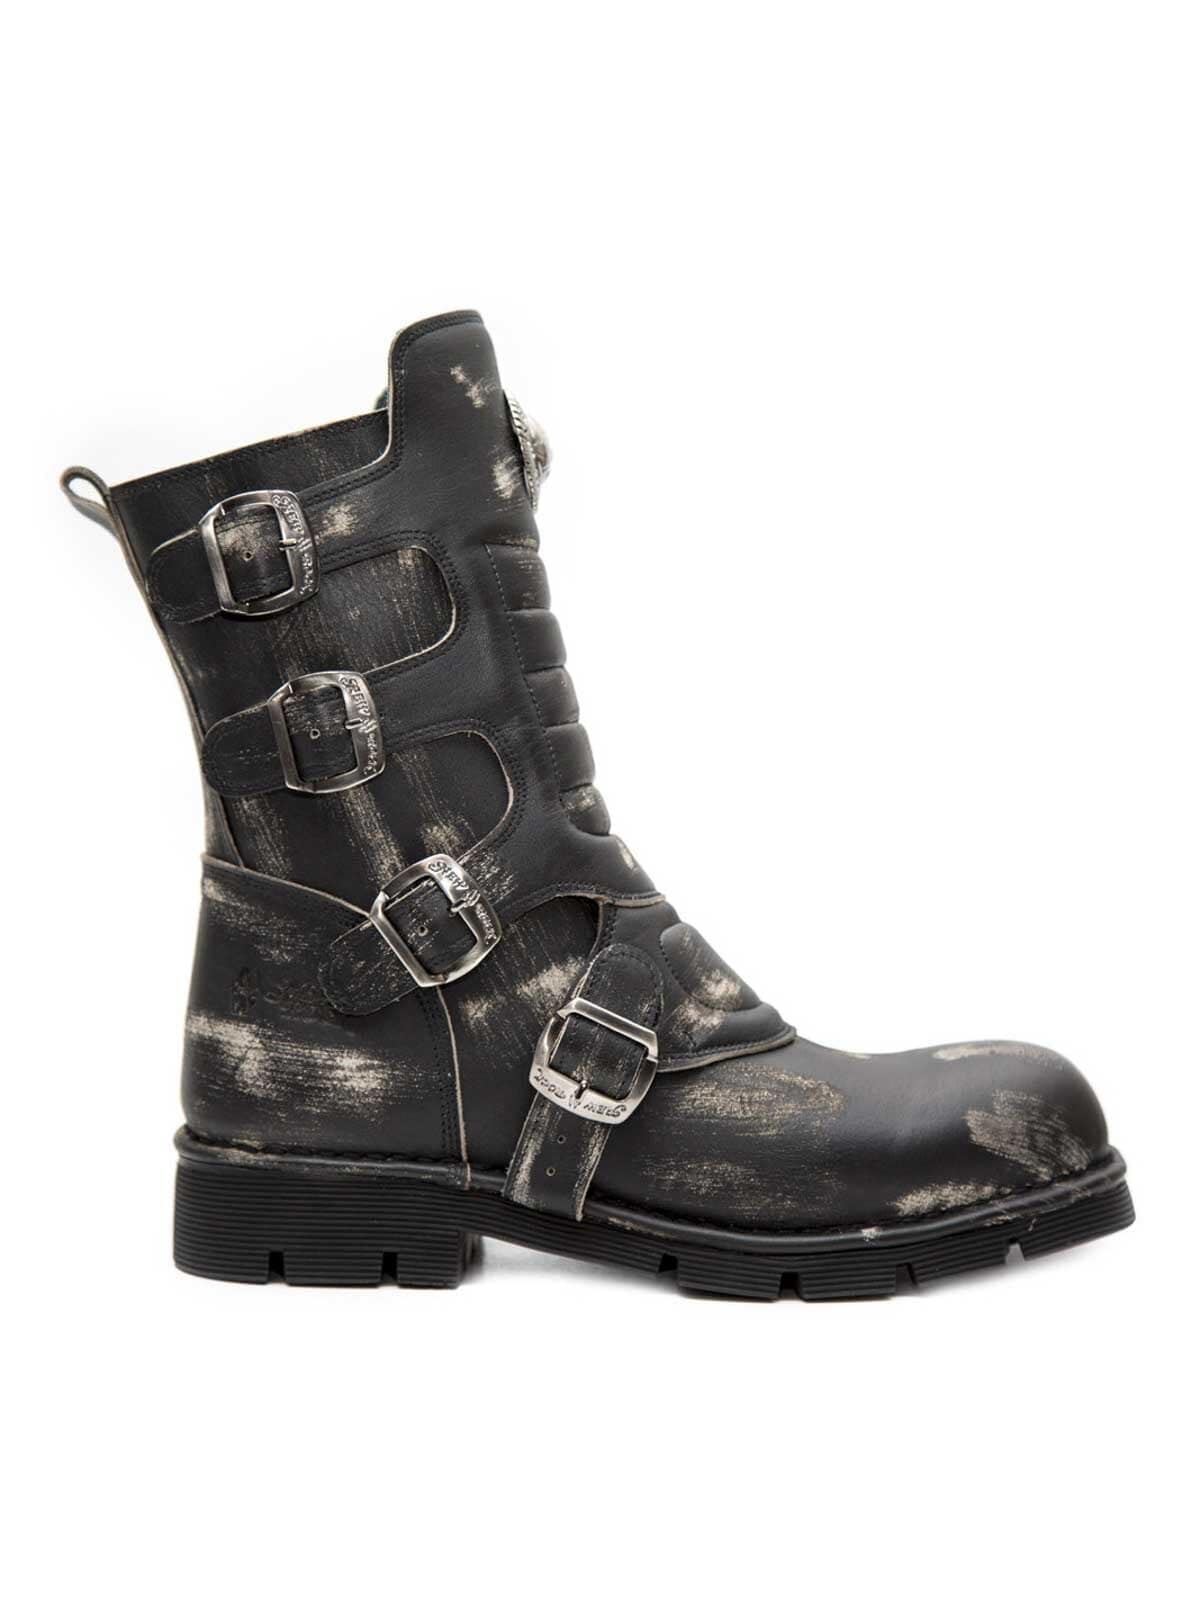 New Rock Boots - Dirty Black